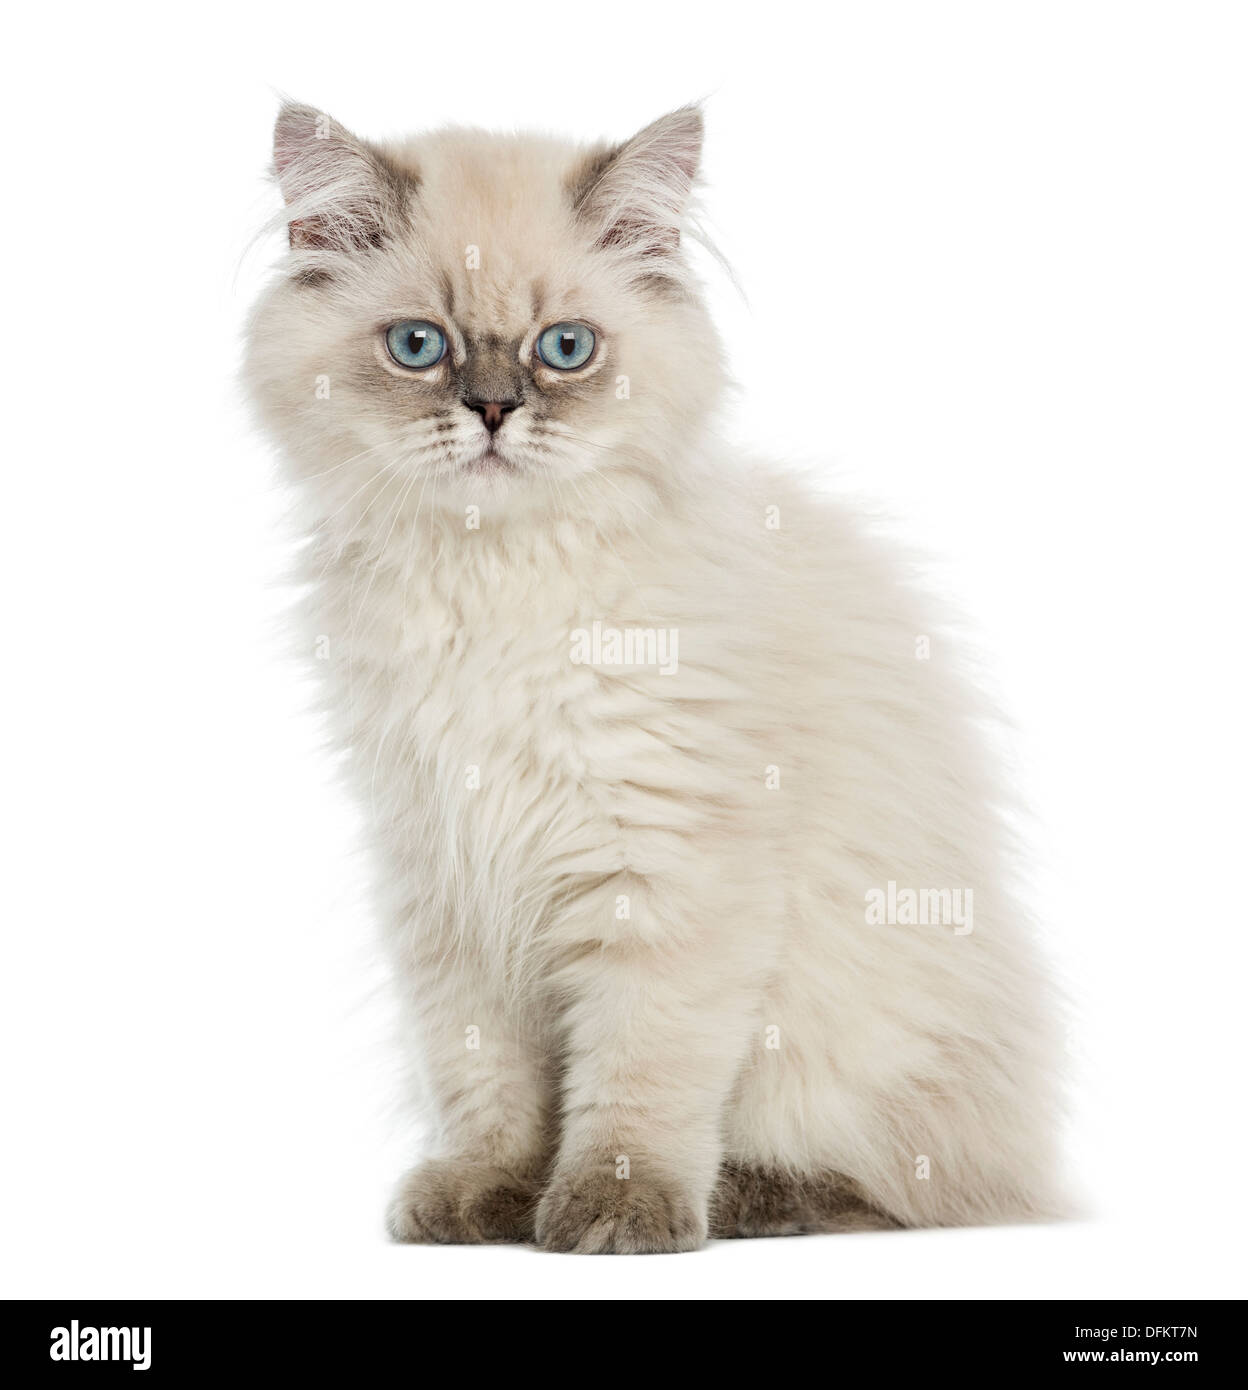 British Longhair kitten sitting, lloking at the camera, 5 months old, against white background Stock Photo